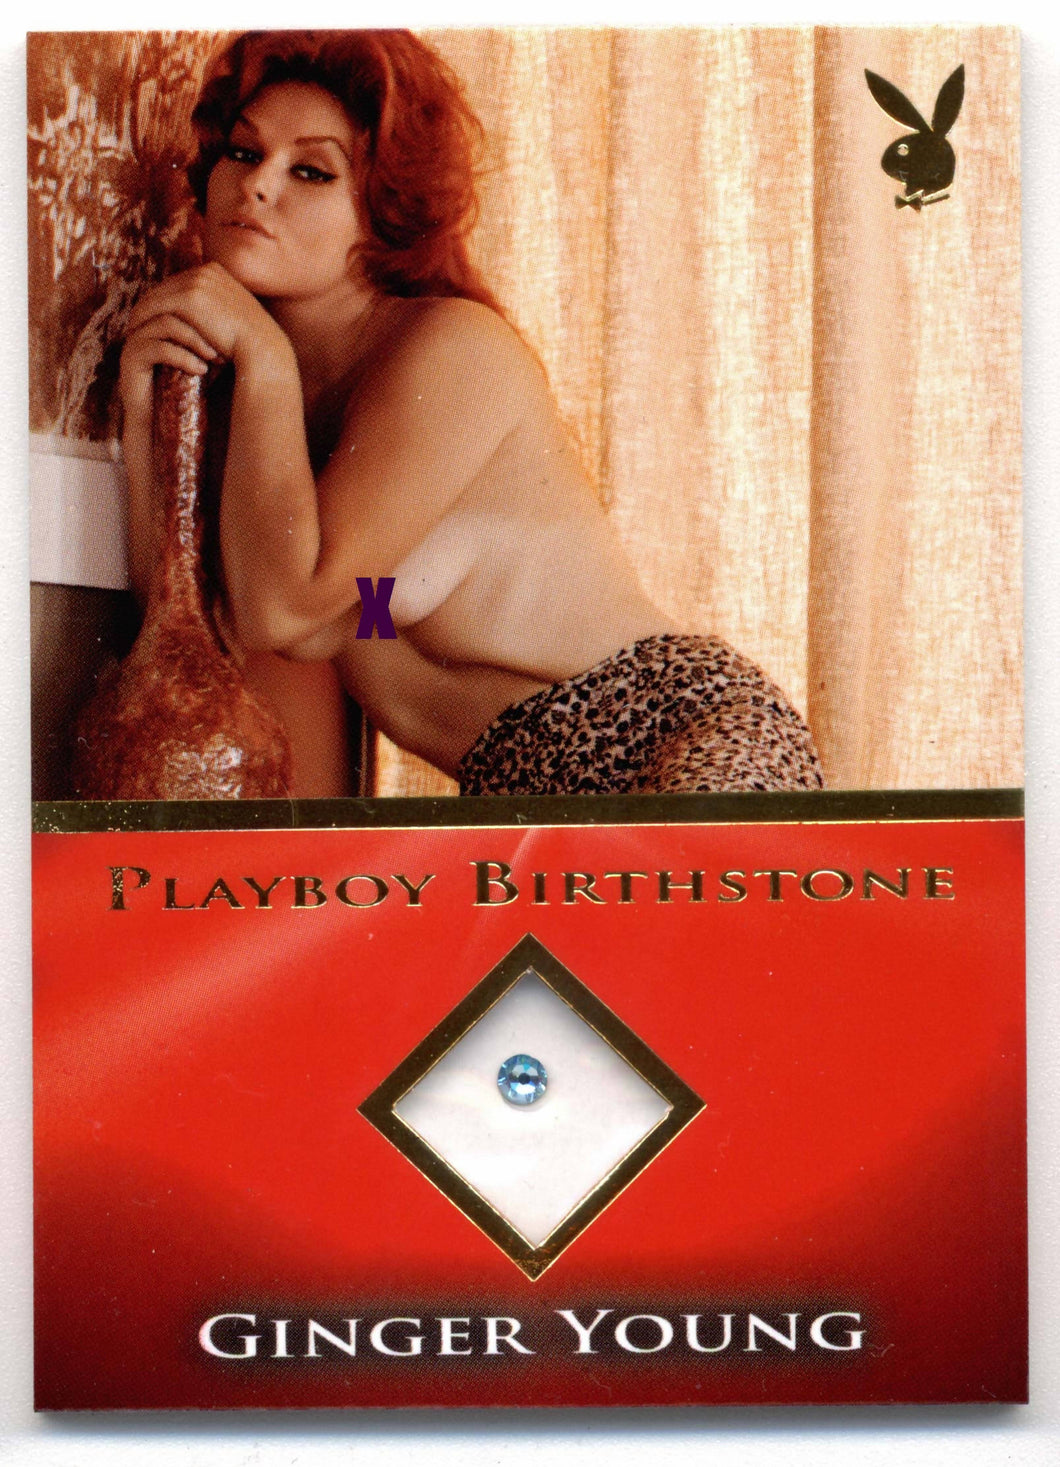 Playboy's Hard Bodies - Birthstone Card - Ginger Young